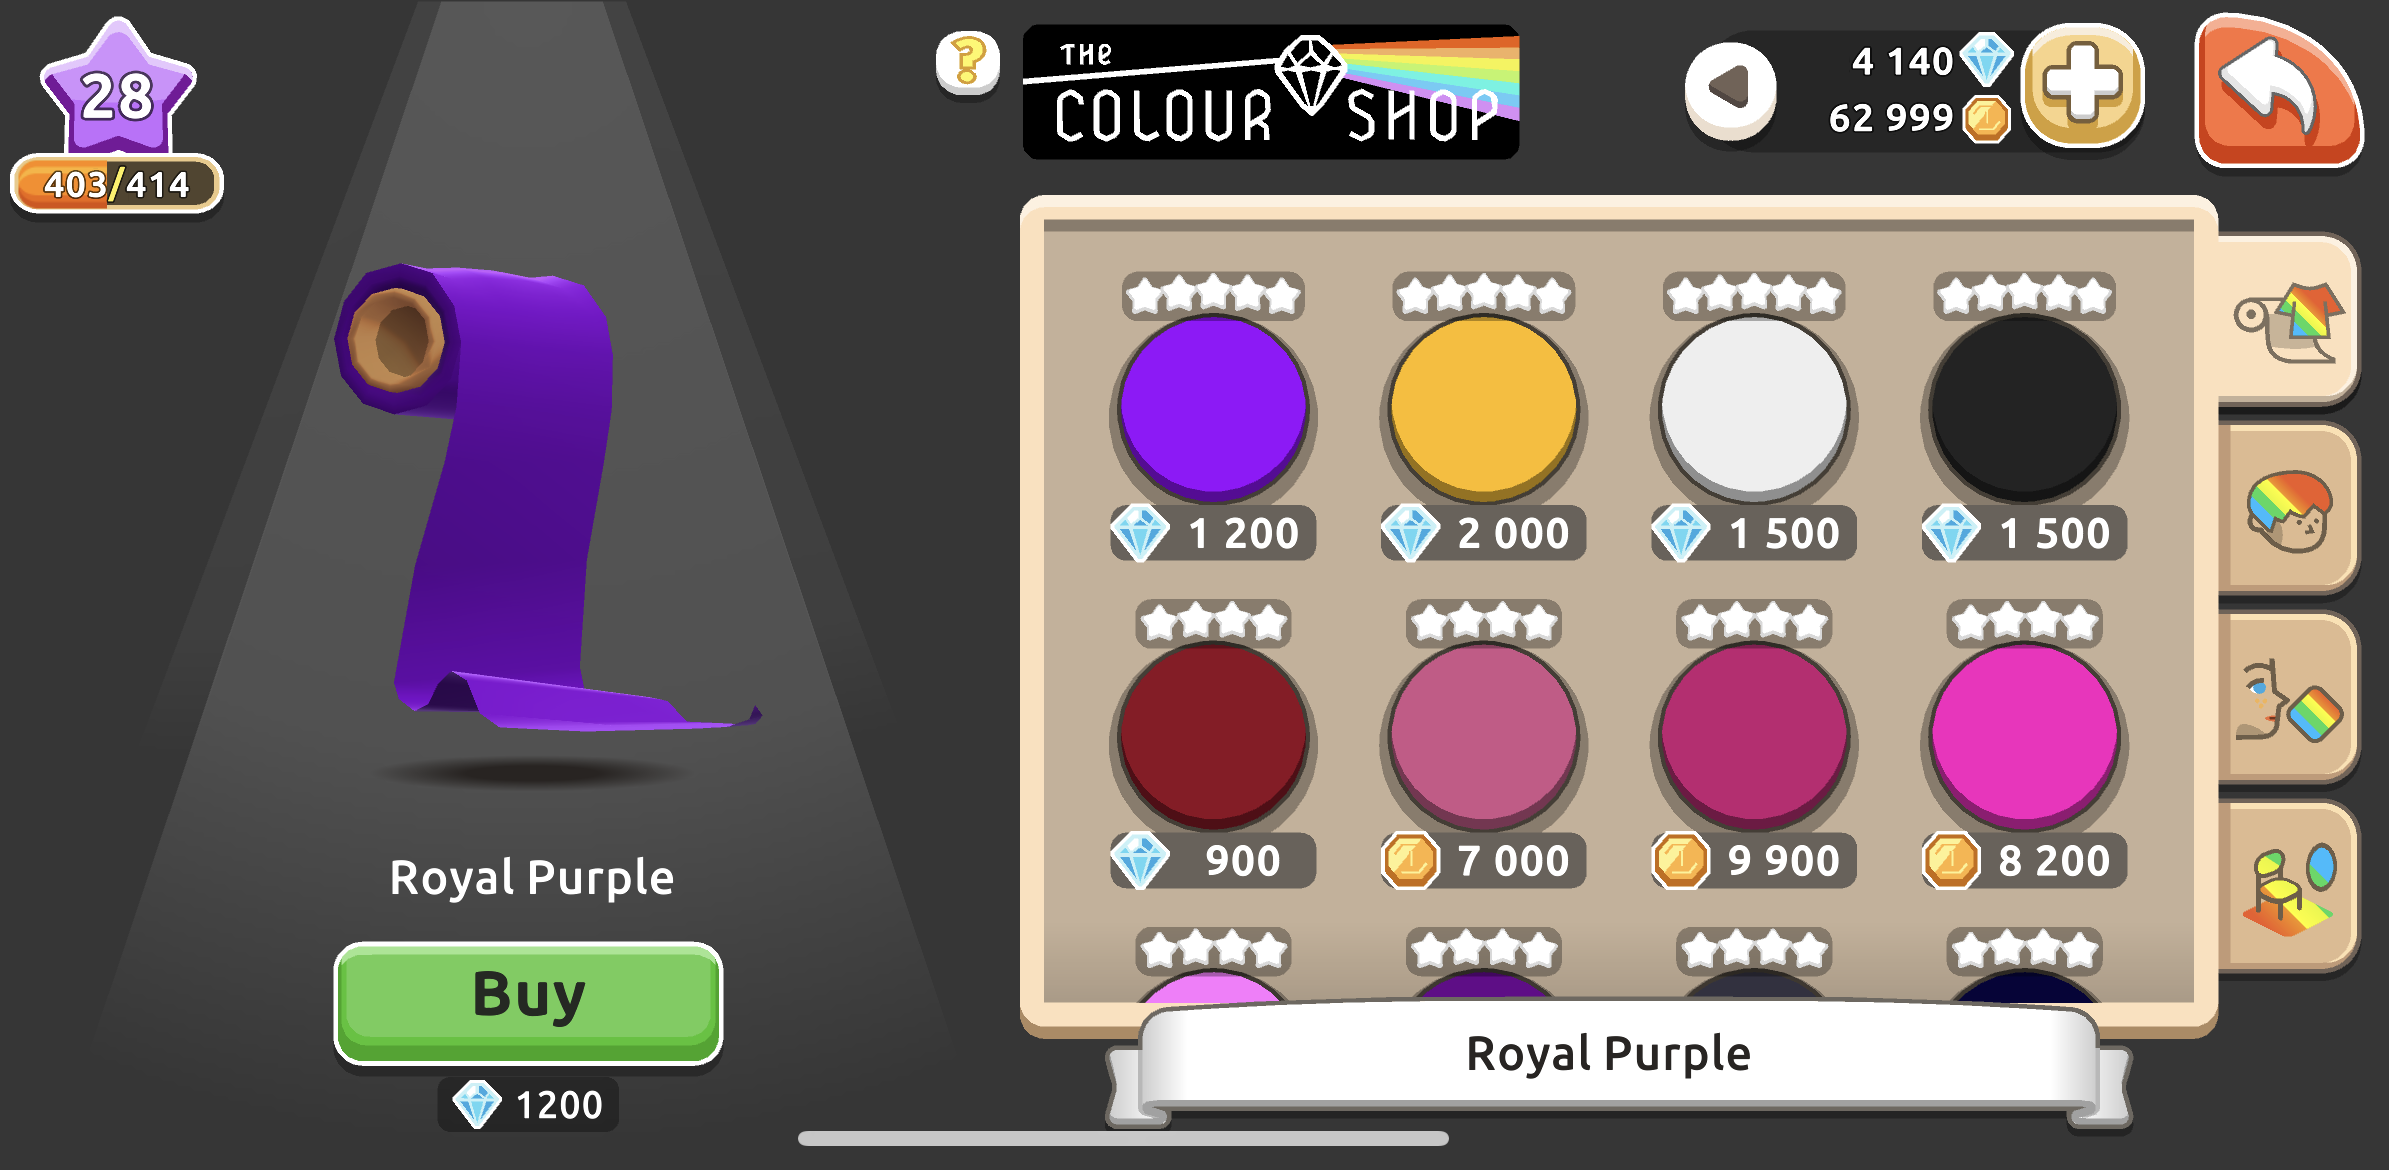 Overview of The Color Shop